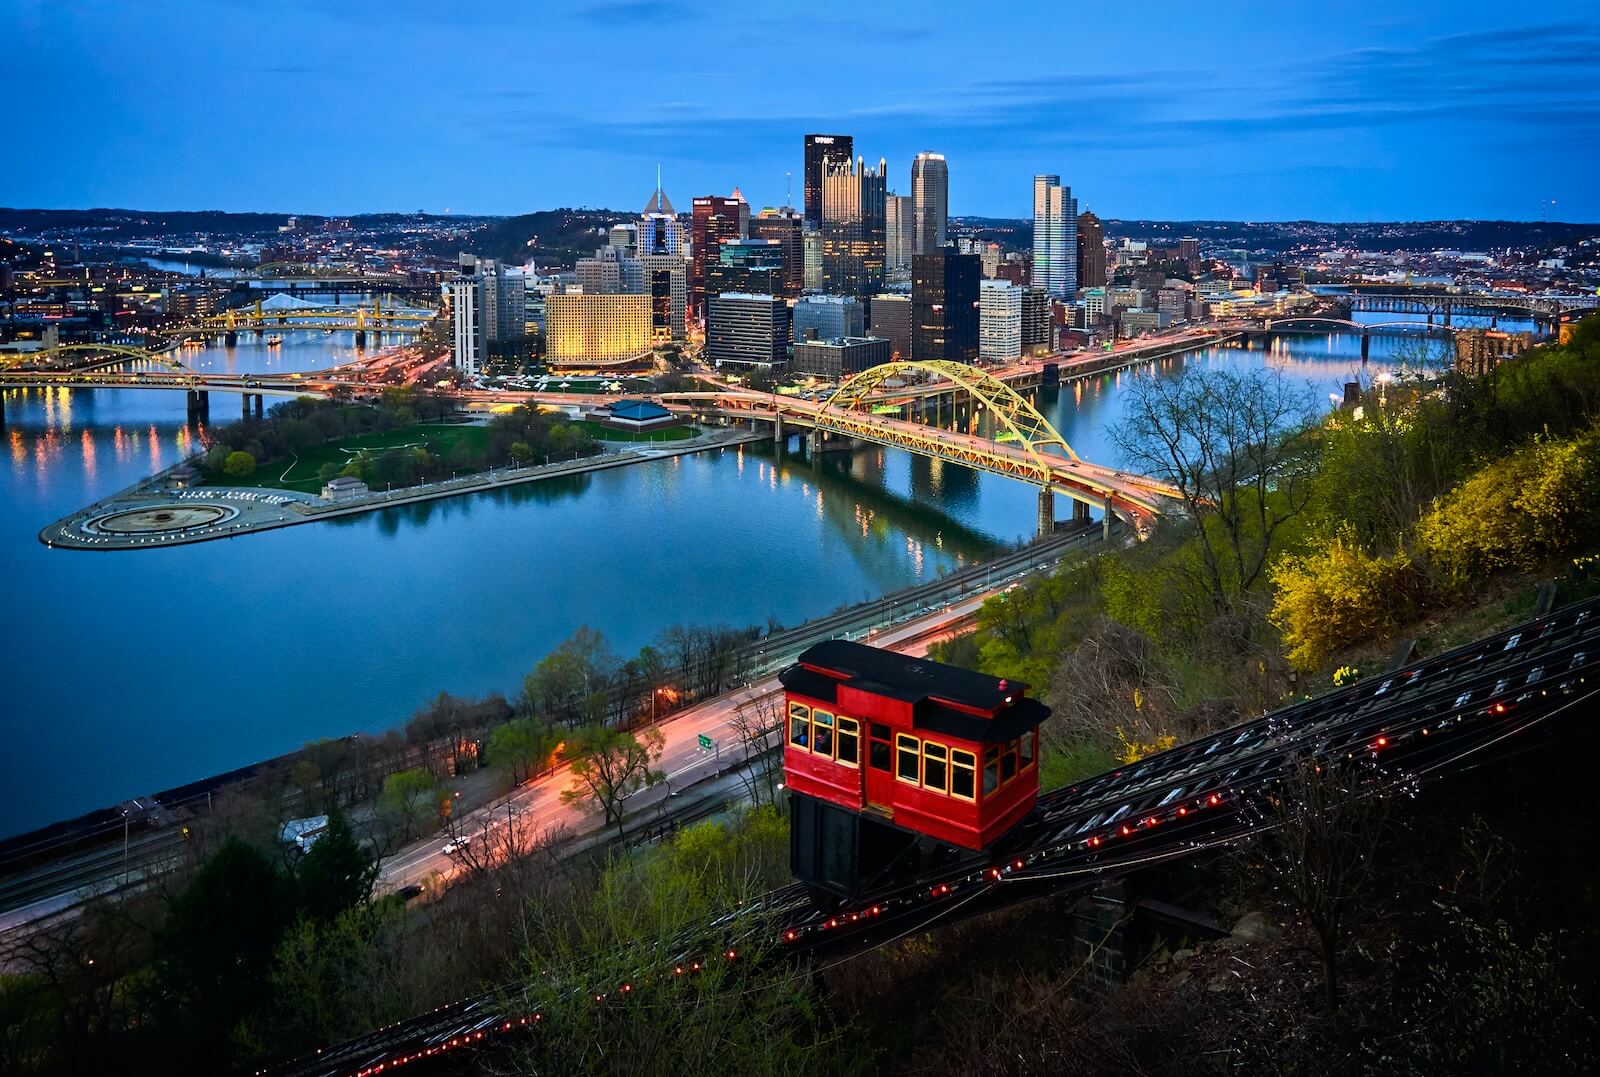 Duquesne Incline in front of Pittsburgh at dusk 